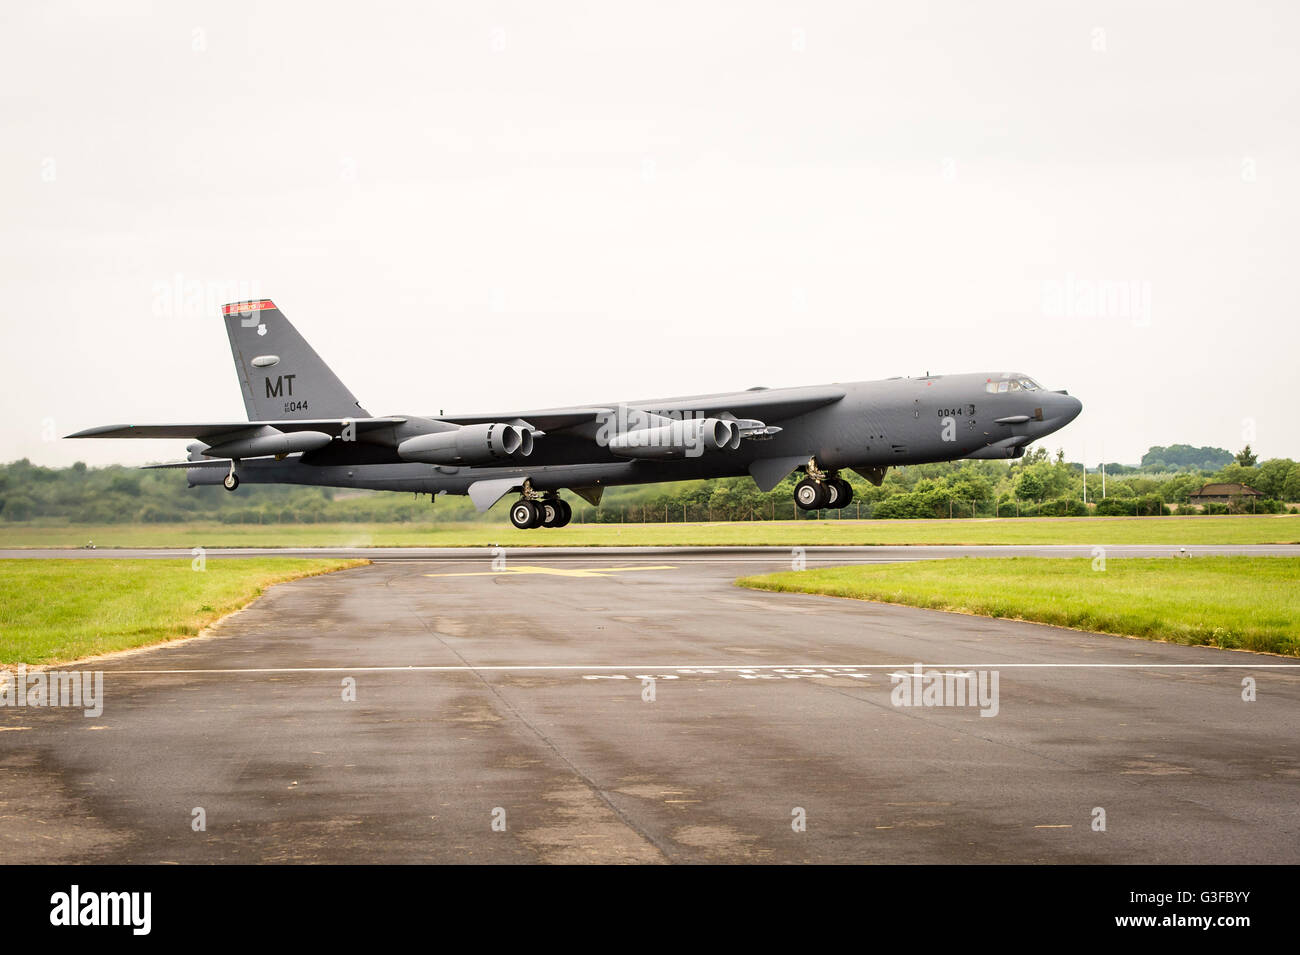 A United States Air Force (USAF) Boeing B-52H Stratofortress strategic bomber of the 23d Bomb Squadron, takes off from RAF Fairford airbase heading to Northern Europe on a NATO exercise, as part of a US Air Force Global Strike Command deployment to Fairford, for military training exercises. Stock Photo